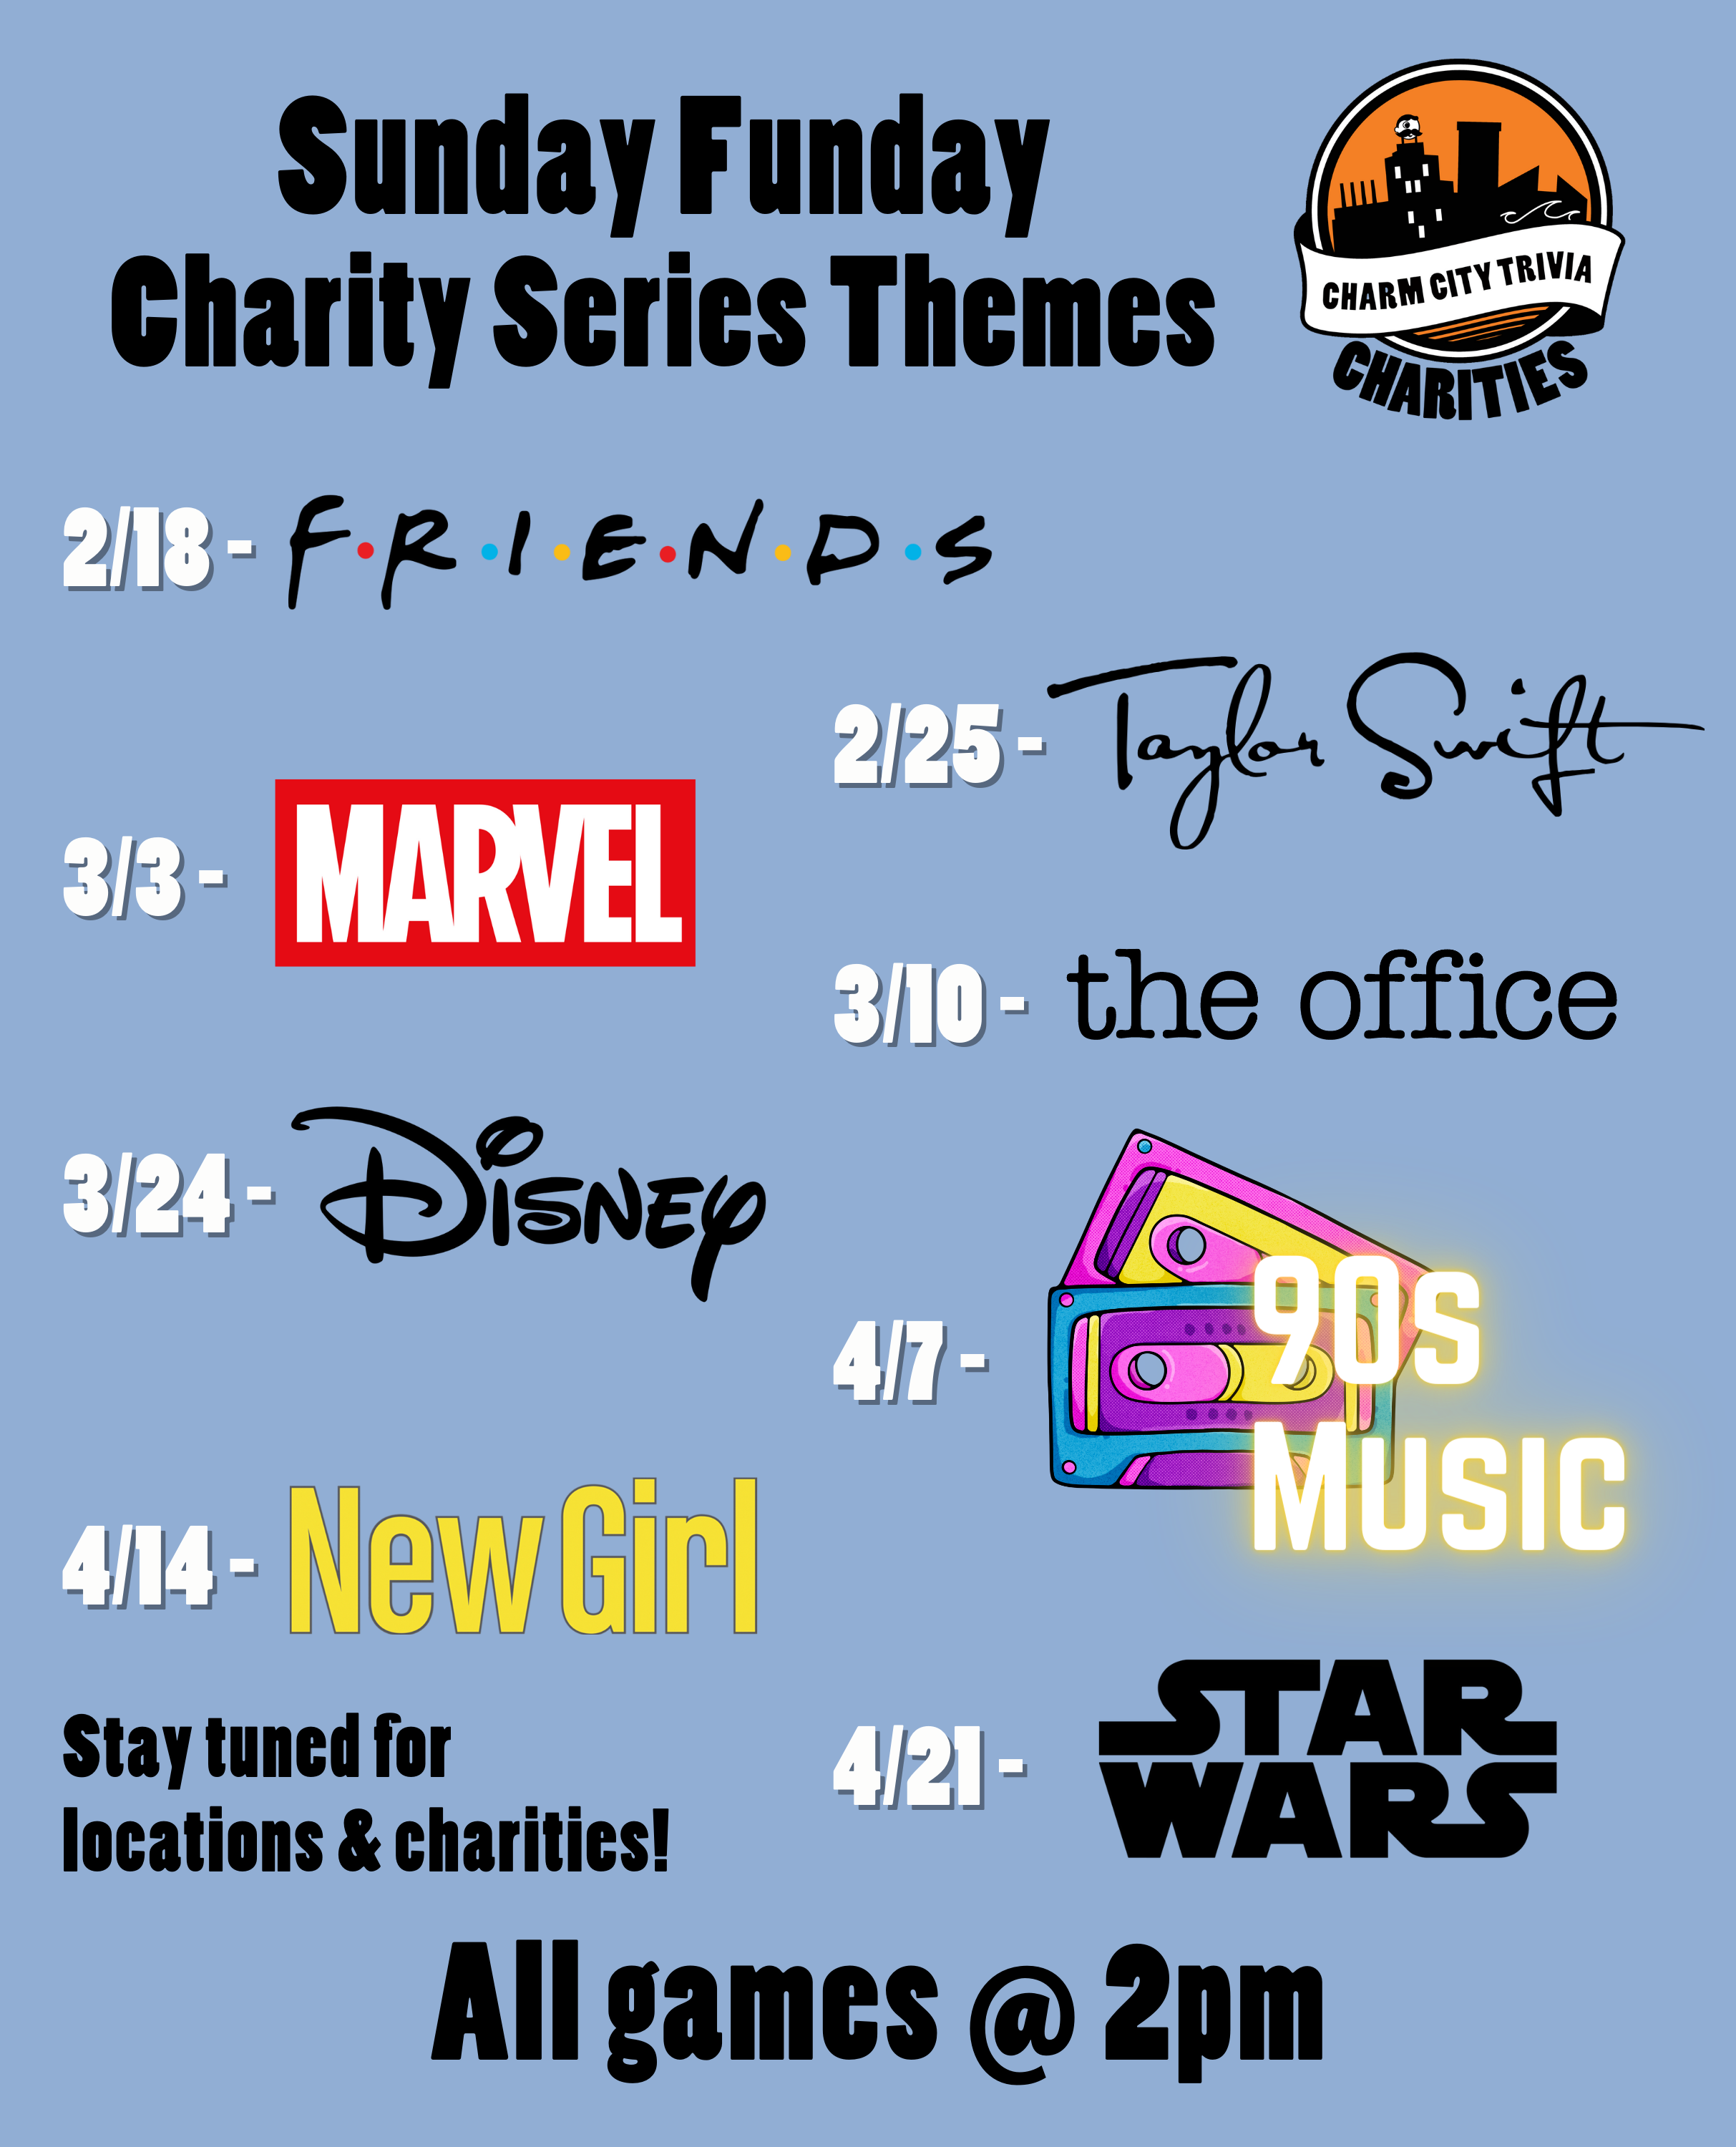 a light blue background with the Charm City Trivia Charities logo, theme logos, and black & white text. The text, including the theme logos, reads: Sunday Funday Charity Series Themes. 2/18 - Friends. 2/25 - Taylor Swift. 3/3 - Marvel. 3/10 - The Office. 3/24 - Disney. 4/7 - 90s Music. 4/14 - New Girl. 4/21 - Star Wars. Stay tuned for locations & charities! All games at 2pm